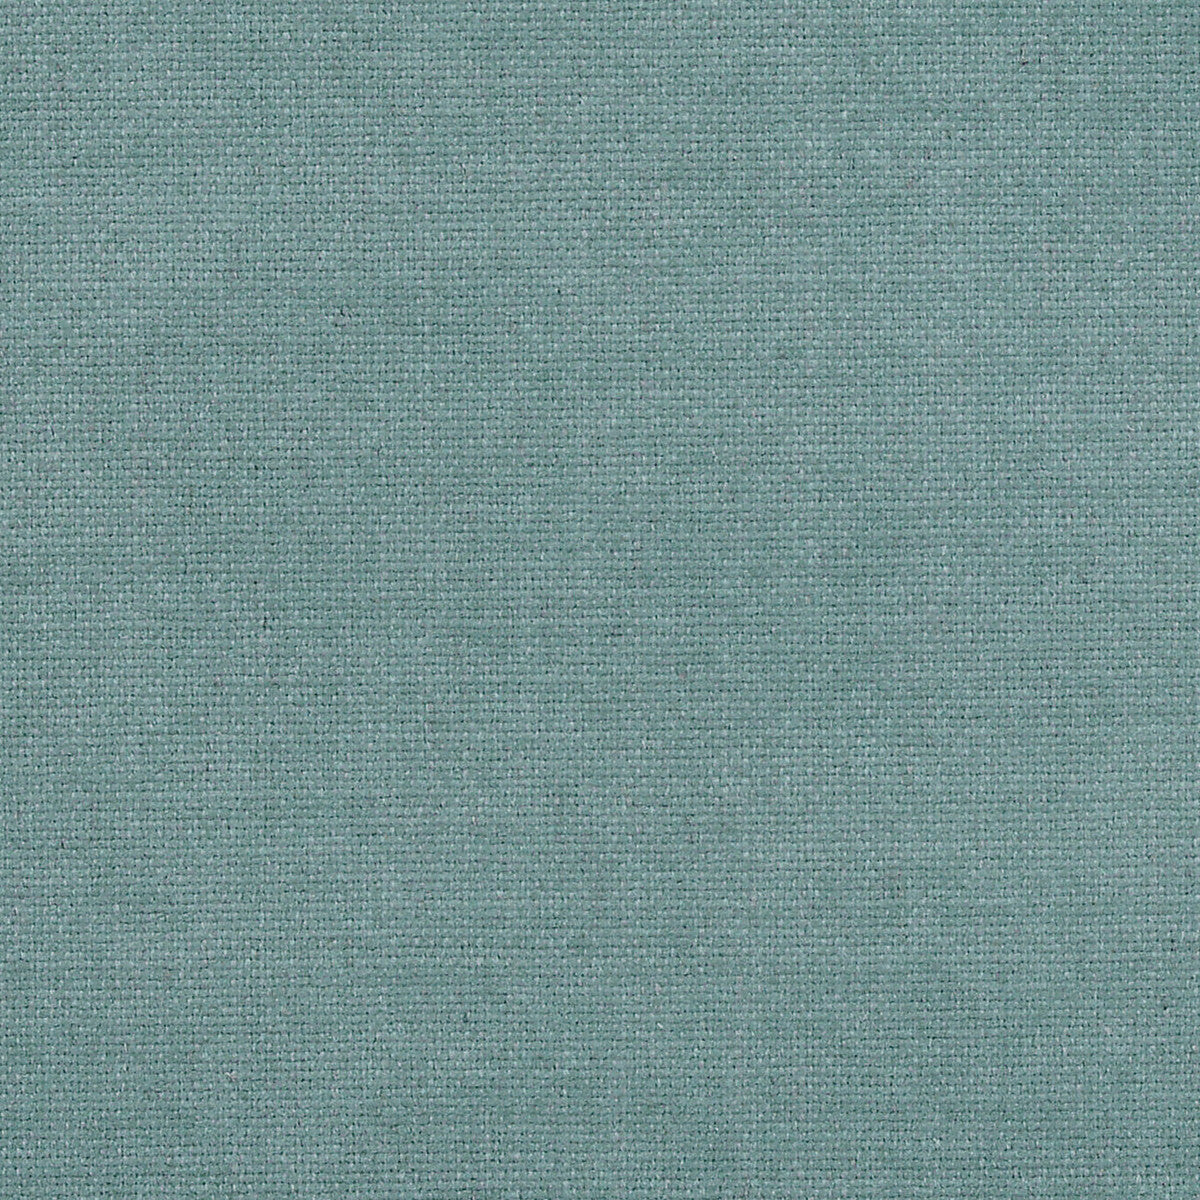 Kravet Contract fabric in 35177-130 color - pattern 35177.130.0 - by Kravet Contract